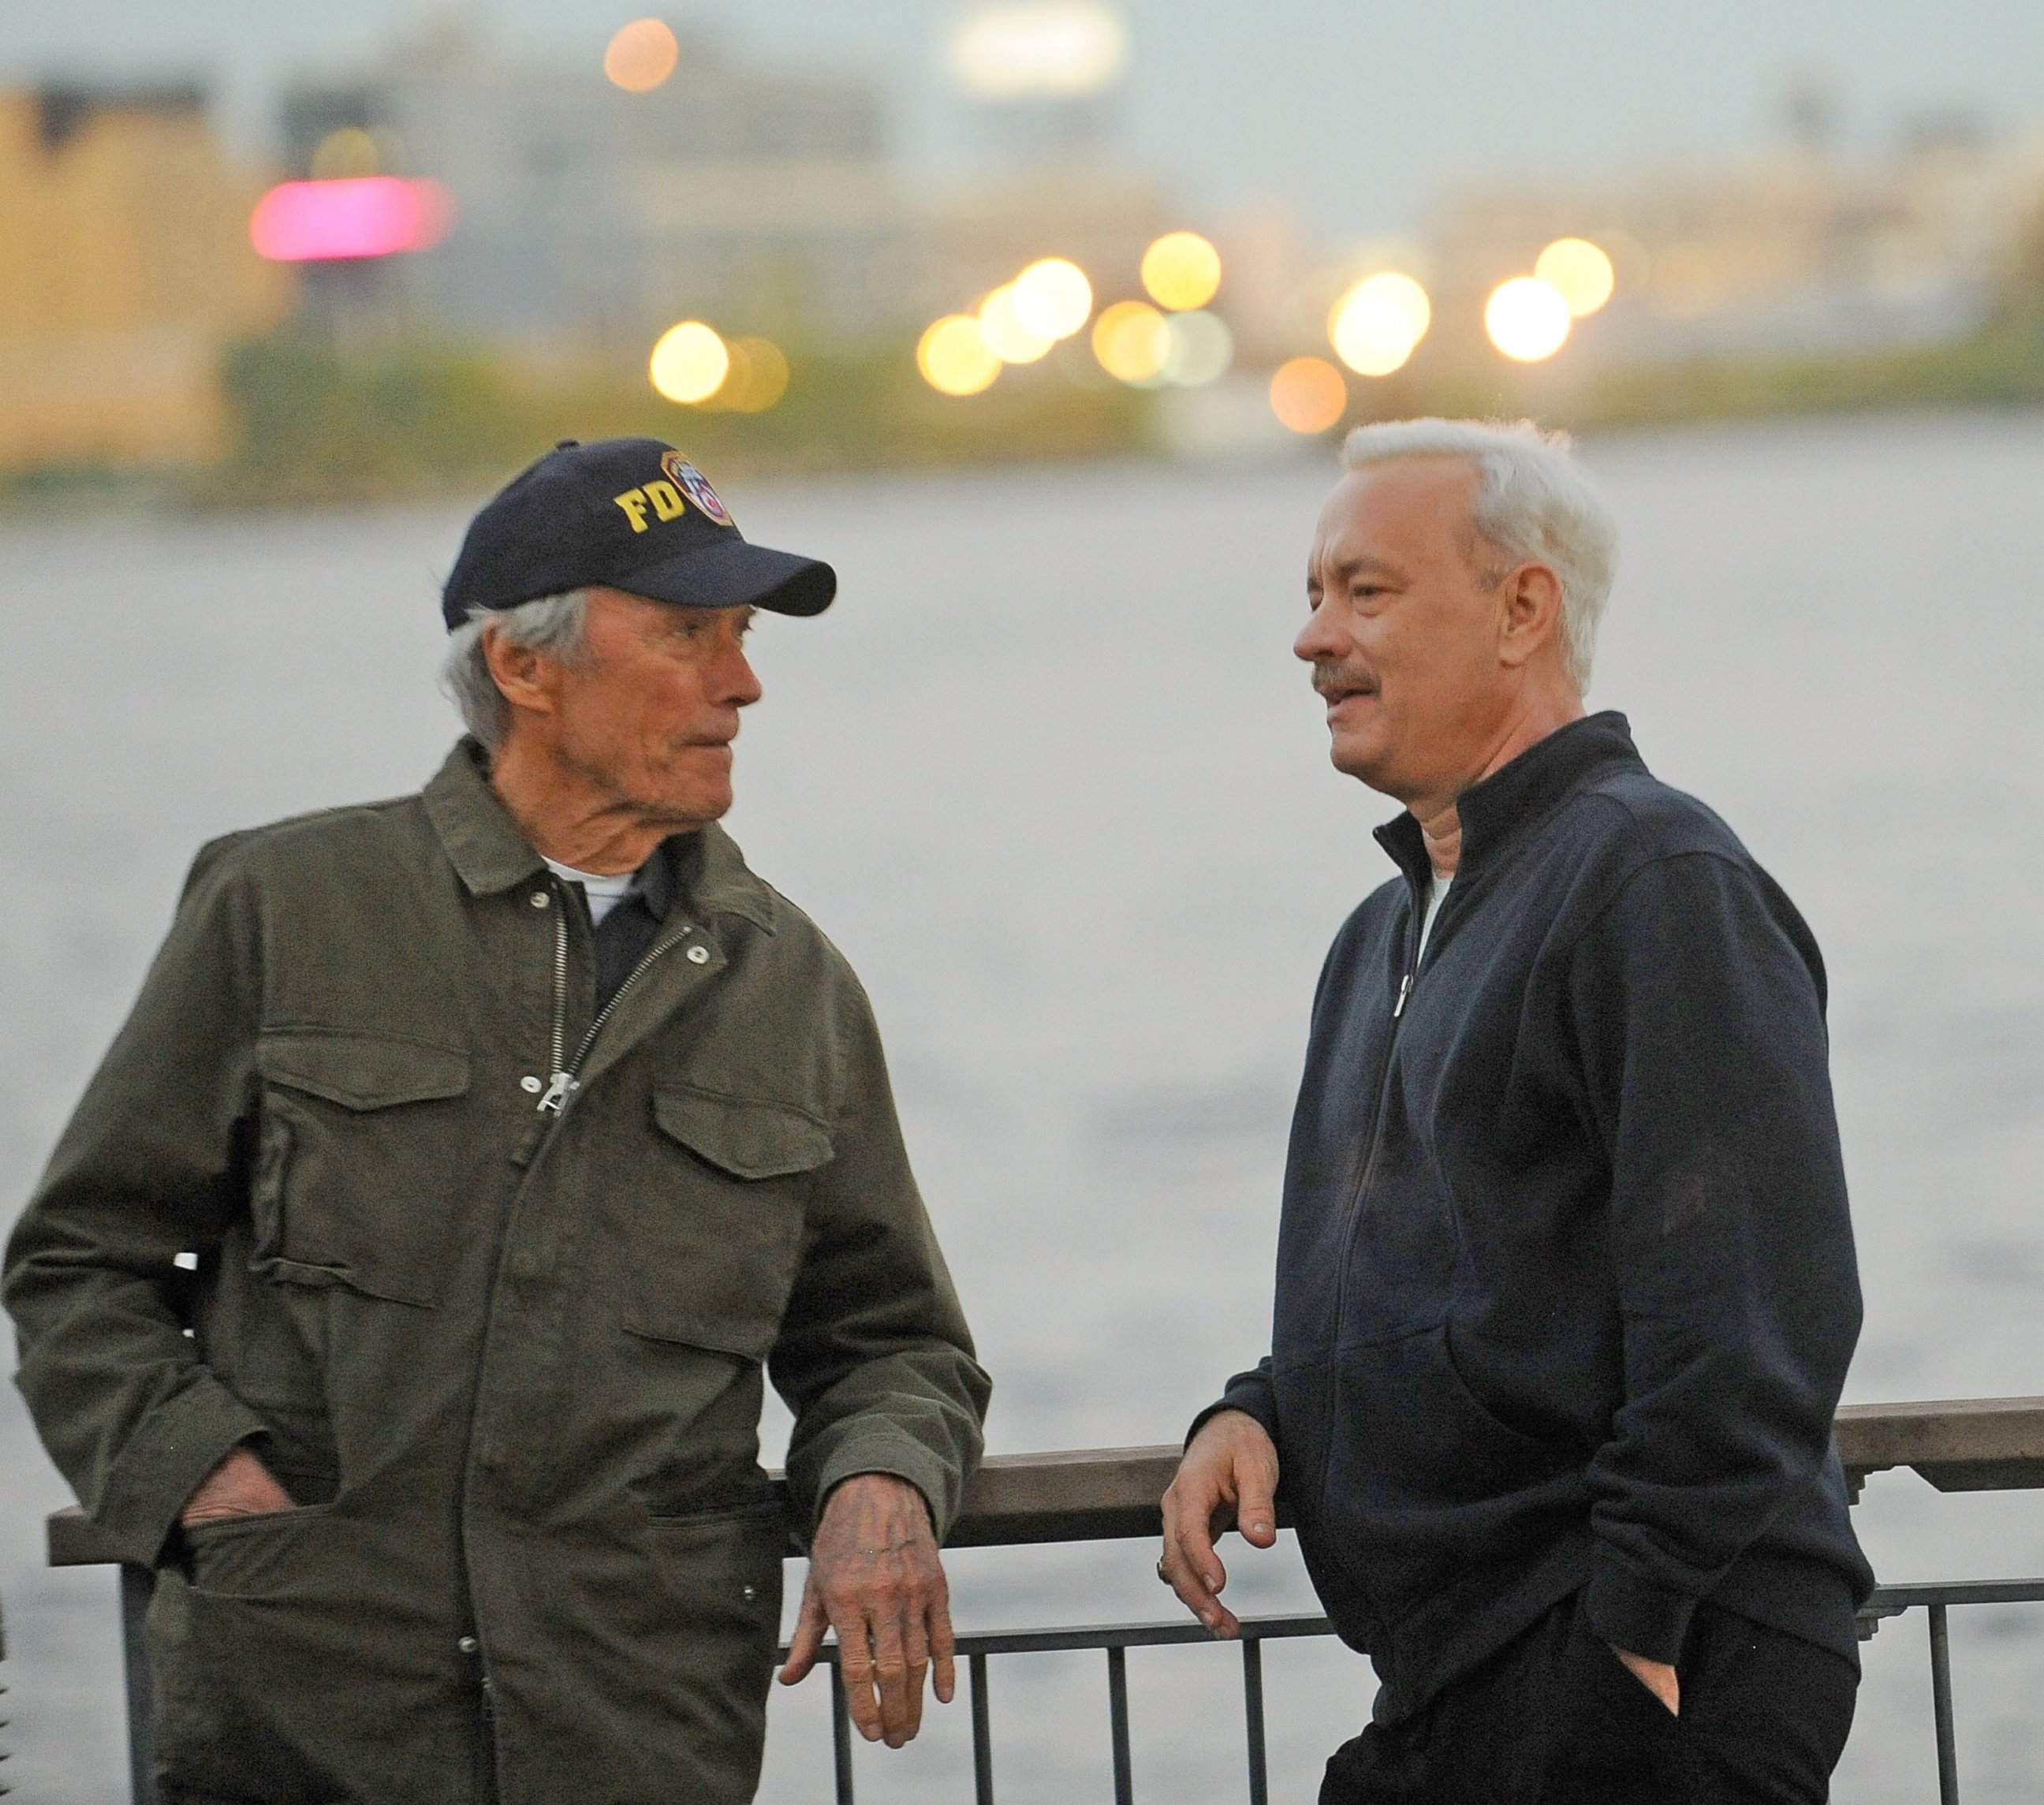 PHOTO: Director Clint Eastwood and actor Tom Hanks on the set of "Sully" Oct. 7, 2015, in New York.